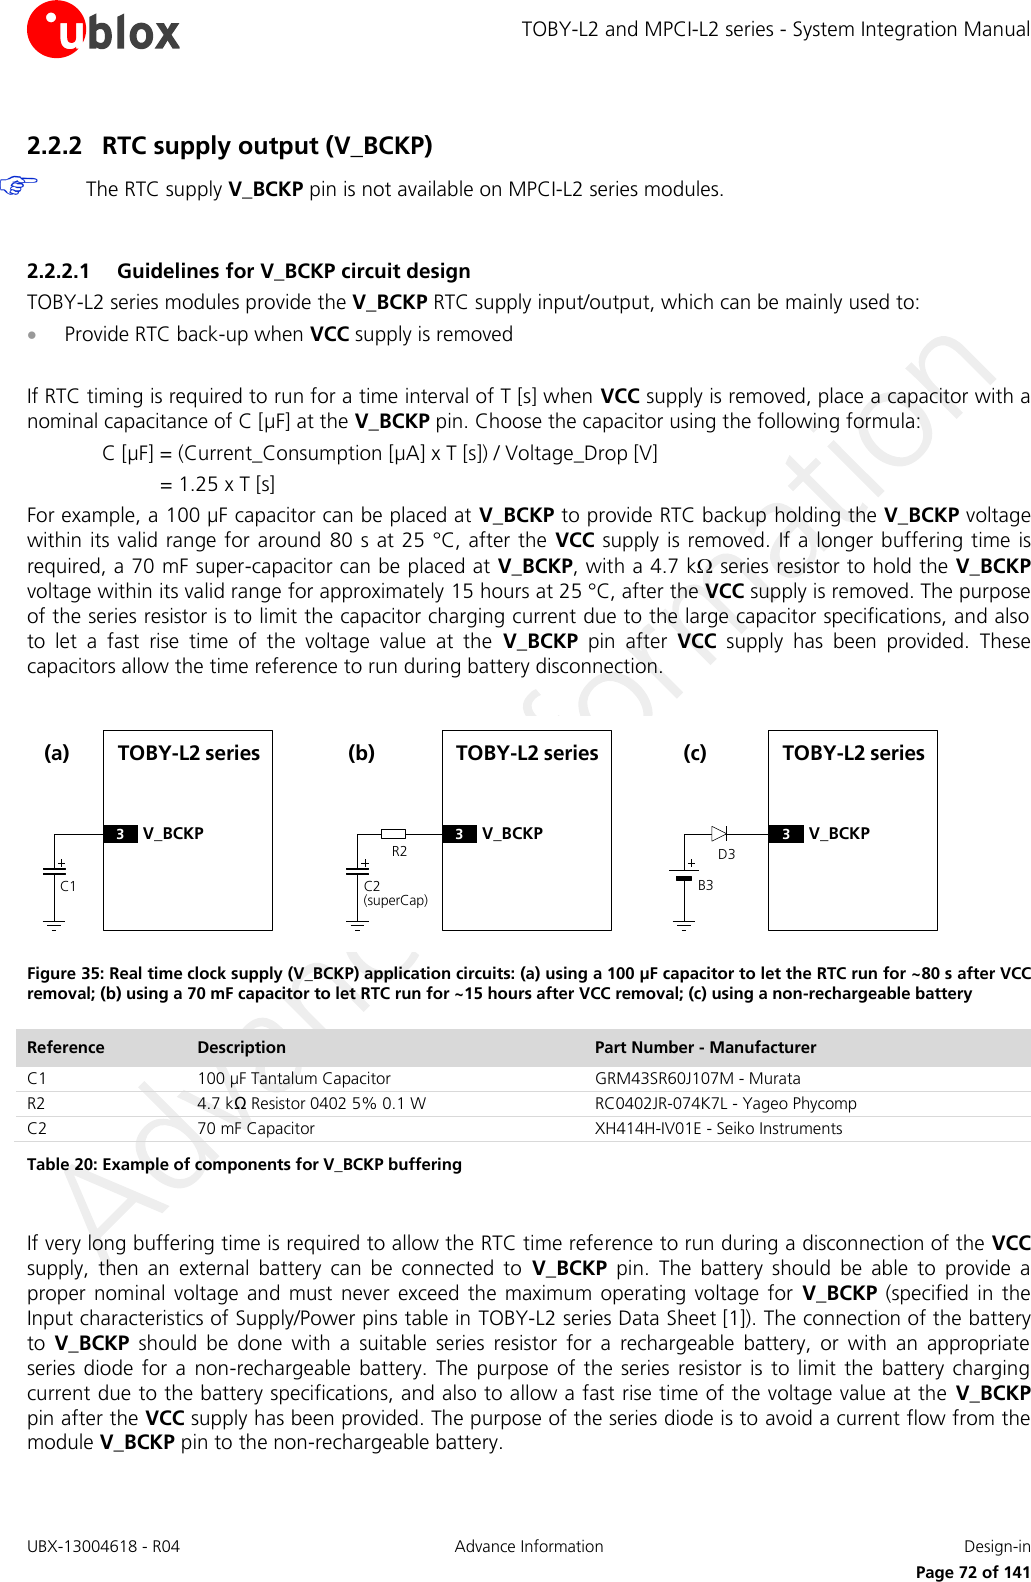 TOBY-L2 and MPCI-L2 series - System Integration Manual UBX-13004618 - R04  Advance Information  Design-in     Page 72 of 141 2.2.2 RTC supply output (V_BCKP)  The RTC supply V_BCKP pin is not available on MPCI-L2 series modules.  2.2.2.1 Guidelines for V_BCKP circuit design TOBY-L2 series modules provide the V_BCKP RTC supply input/output, which can be mainly used to:   Provide RTC back-up when VCC supply is removed  If RTC timing is required to run for a time interval of T [s] when VCC supply is removed, place a capacitor with a nominal capacitance of C [µF] at the V_BCKP pin. Choose the capacitor using the following formula: C [µF] = (Current_Consumption [µA] x T [s]) / Voltage_Drop [V] = 1.25 x T [s]  For example, a 100 µF capacitor can be placed at V_BCKP to provide RTC backup holding the V_BCKP voltage within its valid range for around  80 s at 25 °C, after the VCC supply is removed.  If a longer buffering time is required, a 70 mF super-capacitor can be placed at V_BCKP, with a 4.7 k series resistor to hold the V_BCKP voltage within its valid range for approximately 15 hours at 25 °C, after the VCC supply is removed. The purpose of the series resistor is to limit the capacitor charging current due to the large capacitor specifications, and also to  let  a  fast  rise  time  of  the  voltage  value  at  the  V_BCKP  pin  after  VCC  supply  has  been  provided.  These capacitors allow the time reference to run during battery disconnection.  TOBY-L2 seriesC1(a)3V_BCKPR2TOBY-L2 seriesC2(superCap)(b)3V_BCKPD3TOBY-L2 seriesB3(c)3V_BCKP Figure 35: Real time clock supply (V_BCKP) application circuits: (a) using a 100 µF capacitor to let the RTC run for ~80 s after VCC removal; (b) using a 70 mF capacitor to let RTC run for ~15 hours after VCC removal; (c) using a non-rechargeable battery Reference Description Part Number - Manufacturer C1 100 µF Tantalum Capacitor GRM43SR60J107M - Murata R2 4.7 kΩ Resistor 0402 5% 0.1 W  RC0402JR-074K7L - Yageo Phycomp C2 70 mF Capacitor  XH414H-IV01E - Seiko Instruments Table 20: Example of components for V_BCKP buffering  If very long buffering time is required to allow the RTC time reference to run during a disconnection of the VCC supply,  then  an  external  battery  can  be  connected  to  V_BCKP  pin.  The  battery  should  be  able  to  provide  a proper  nominal  voltage and  must  never  exceed the  maximum  operating voltage  for  V_BCKP  (specified  in  the Input characteristics of Supply/Power pins table in TOBY-L2 series Data Sheet [1]). The connection of the battery to  V_BCKP  should  be  done  with  a  suitable  series  resistor  for  a  rechargeable  battery,  or  with  an  appropriate series diode  for  a  non-rechargeable  battery. The  purpose  of  the  series resistor  is to limit  the  battery  charging current due to the battery specifications, and also to allow a fast rise time of the voltage value at the  V_BCKP pin after the VCC supply has been provided. The purpose of the series diode is to avoid a current flow from the module V_BCKP pin to the non-rechargeable battery.  